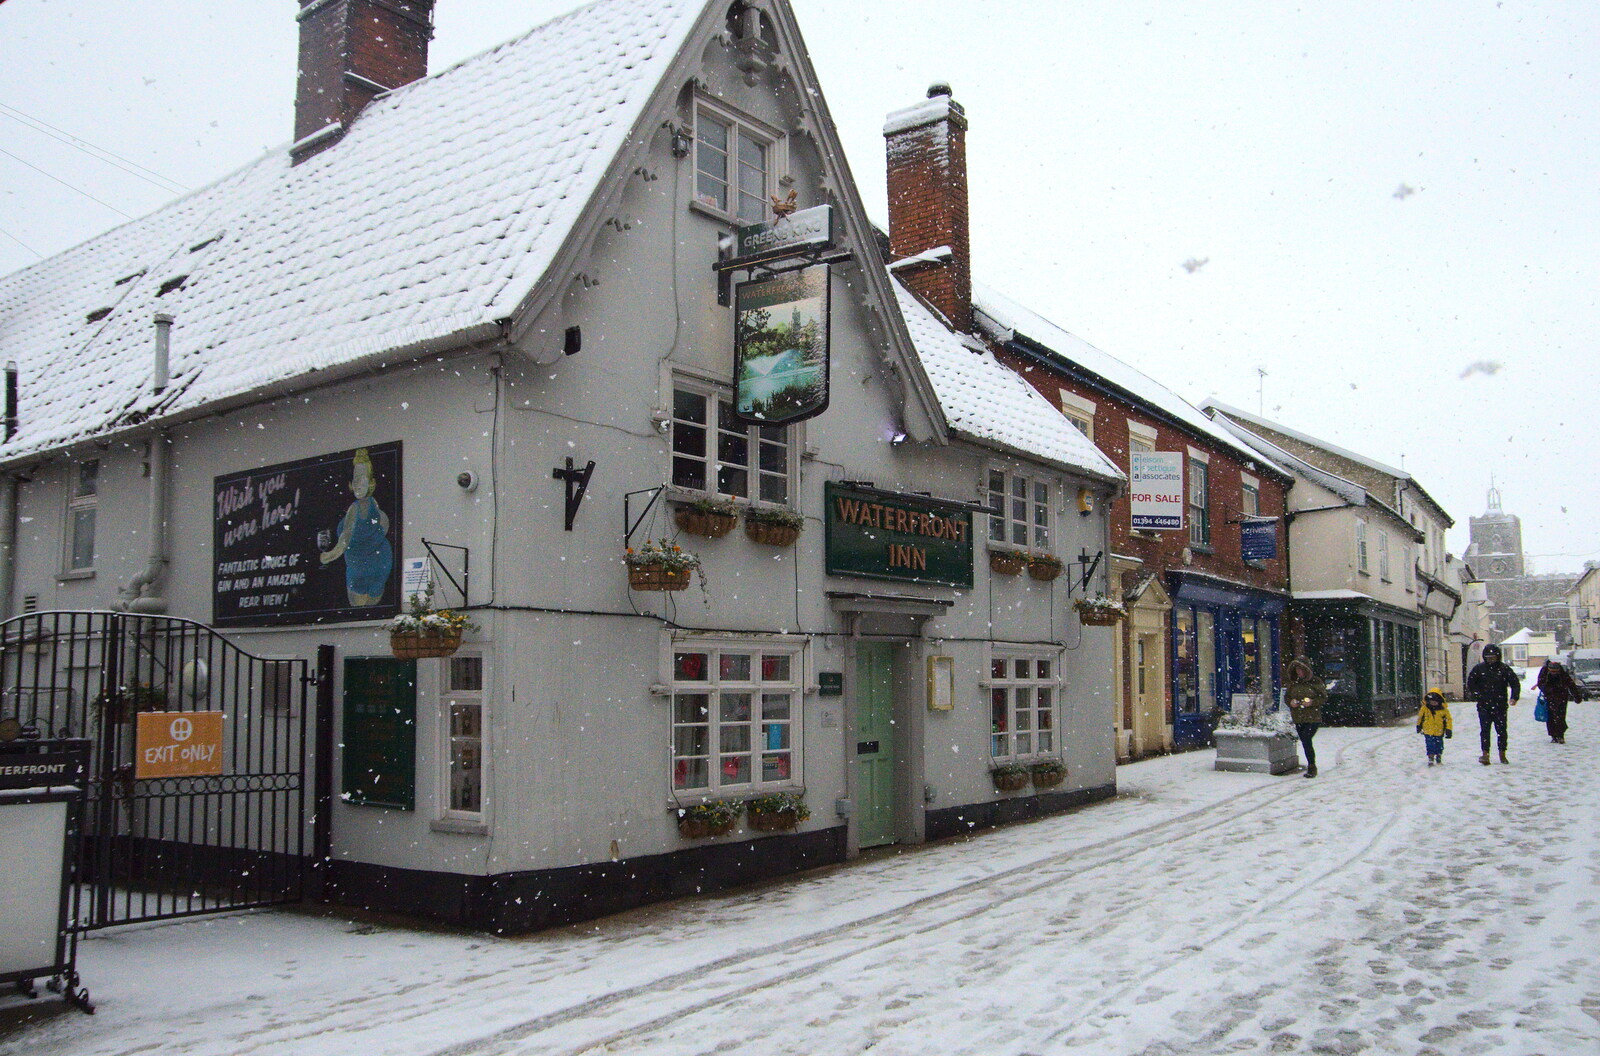 The Waterfront Inn from A Snowy Morning, Diss, Norfolk - 16th January 2021